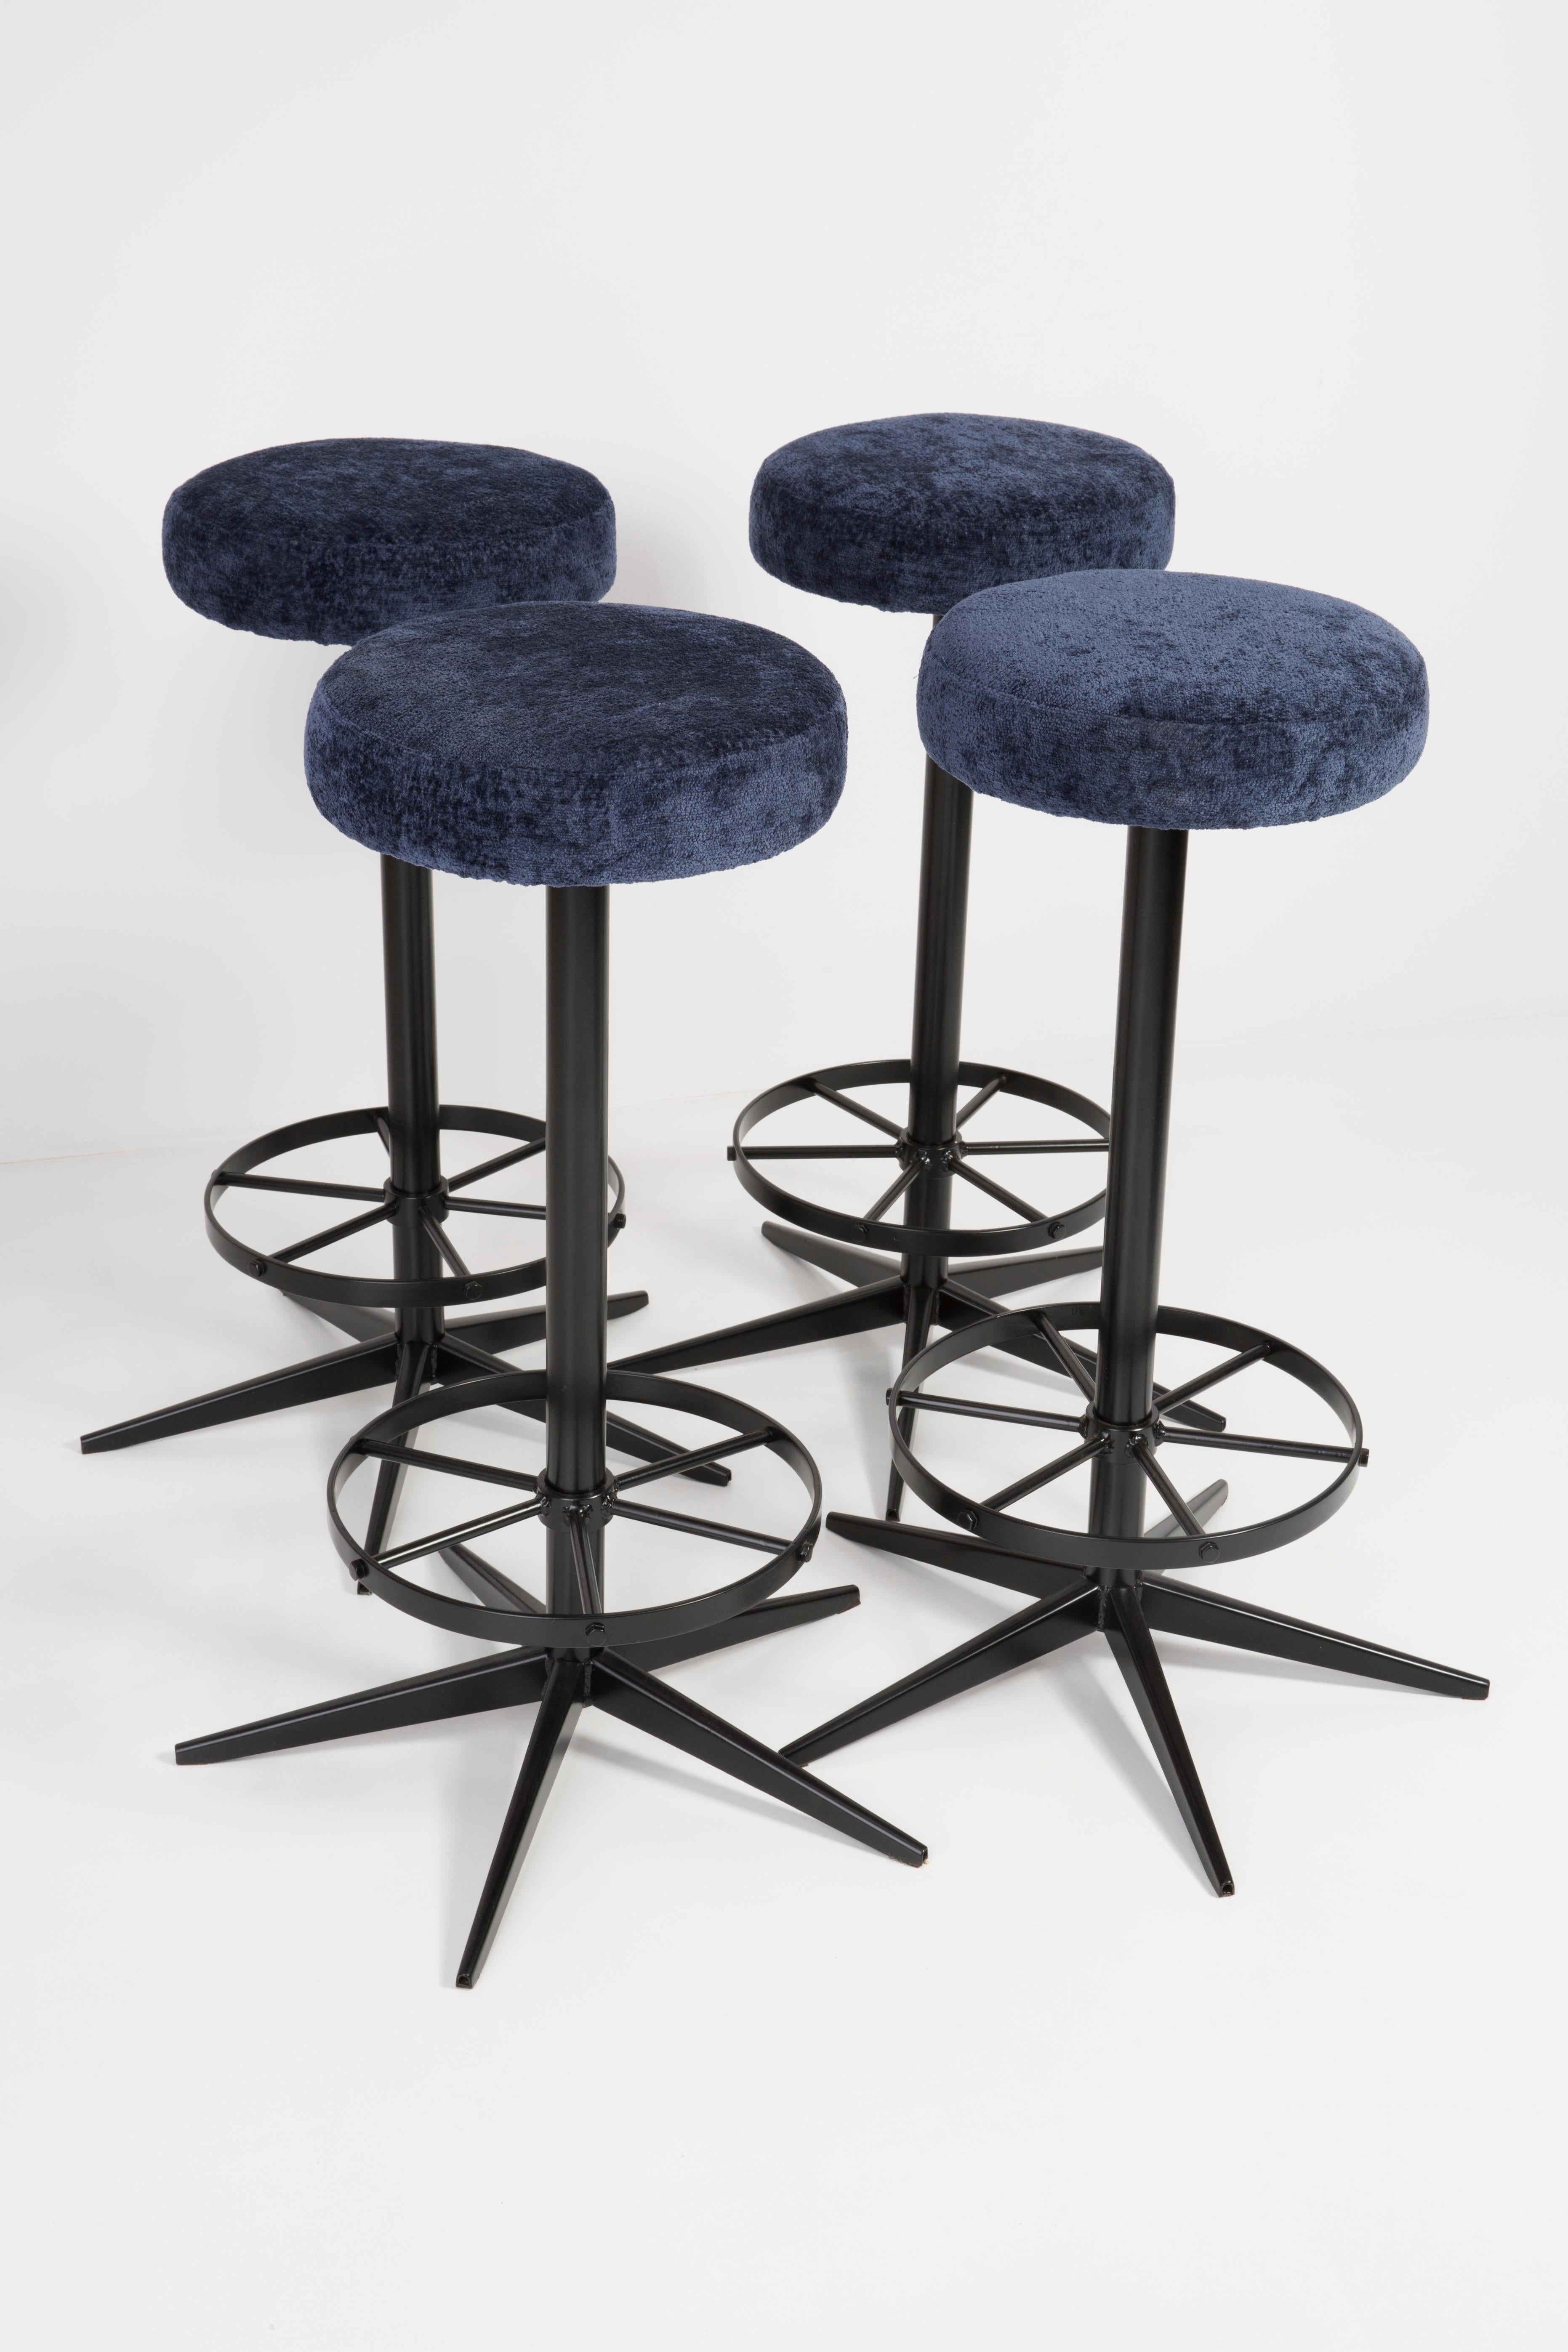 Stools from the turn of the 1960s. Produced in Germany Beautiful, well crafted dark blue upholstery. The stools consists of an upholstered part, a seat and steel black legs. They are not regulated. The height is constant.